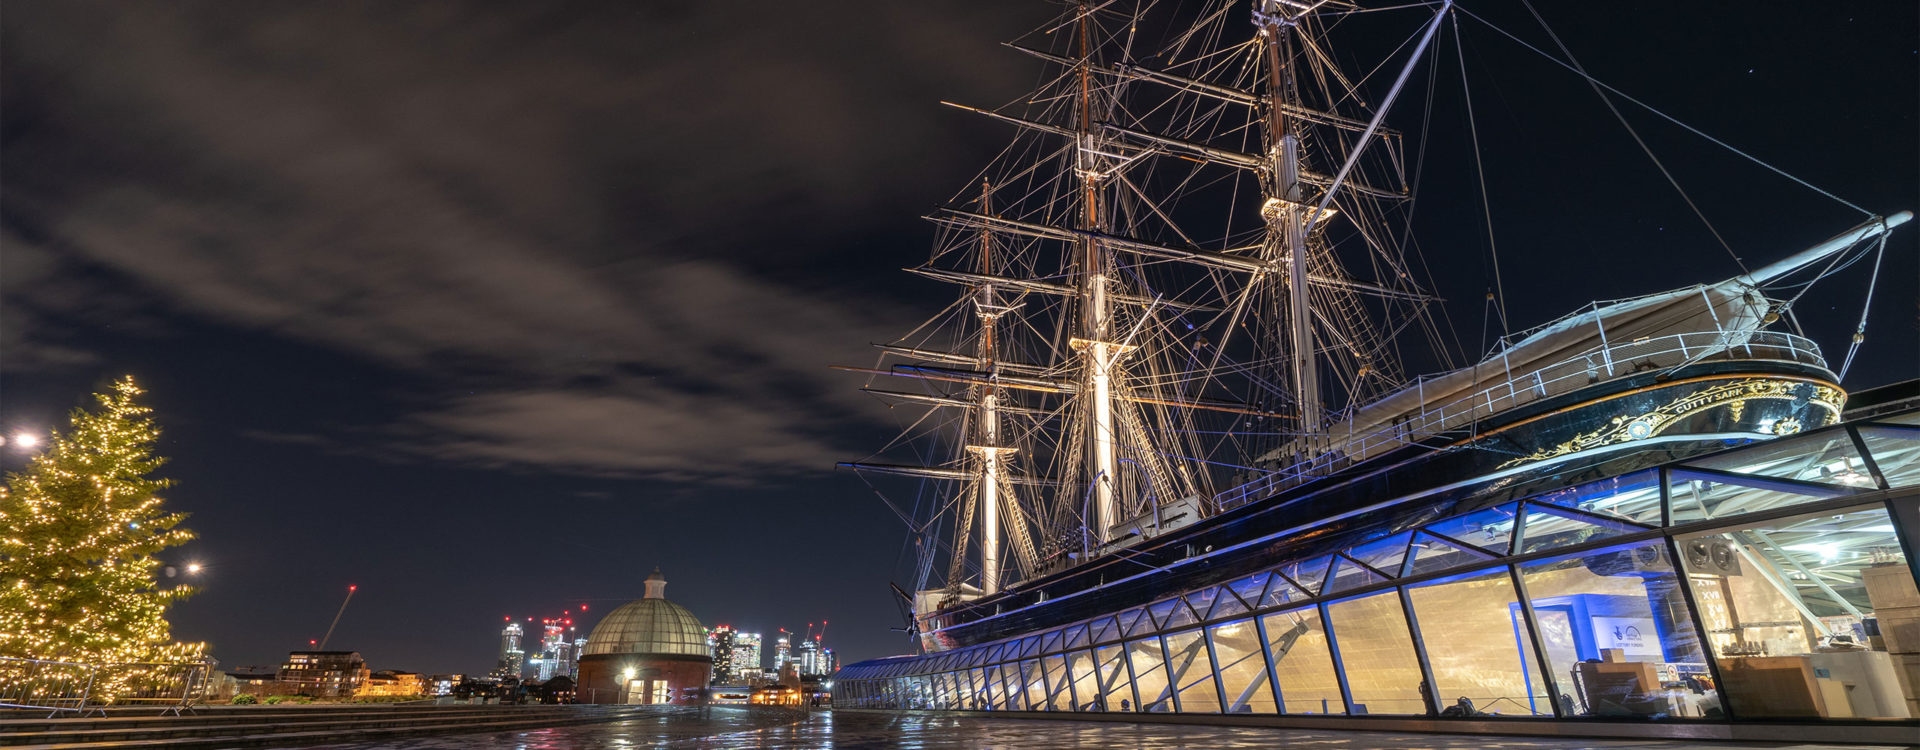 Christmas party at The Cutty Sark